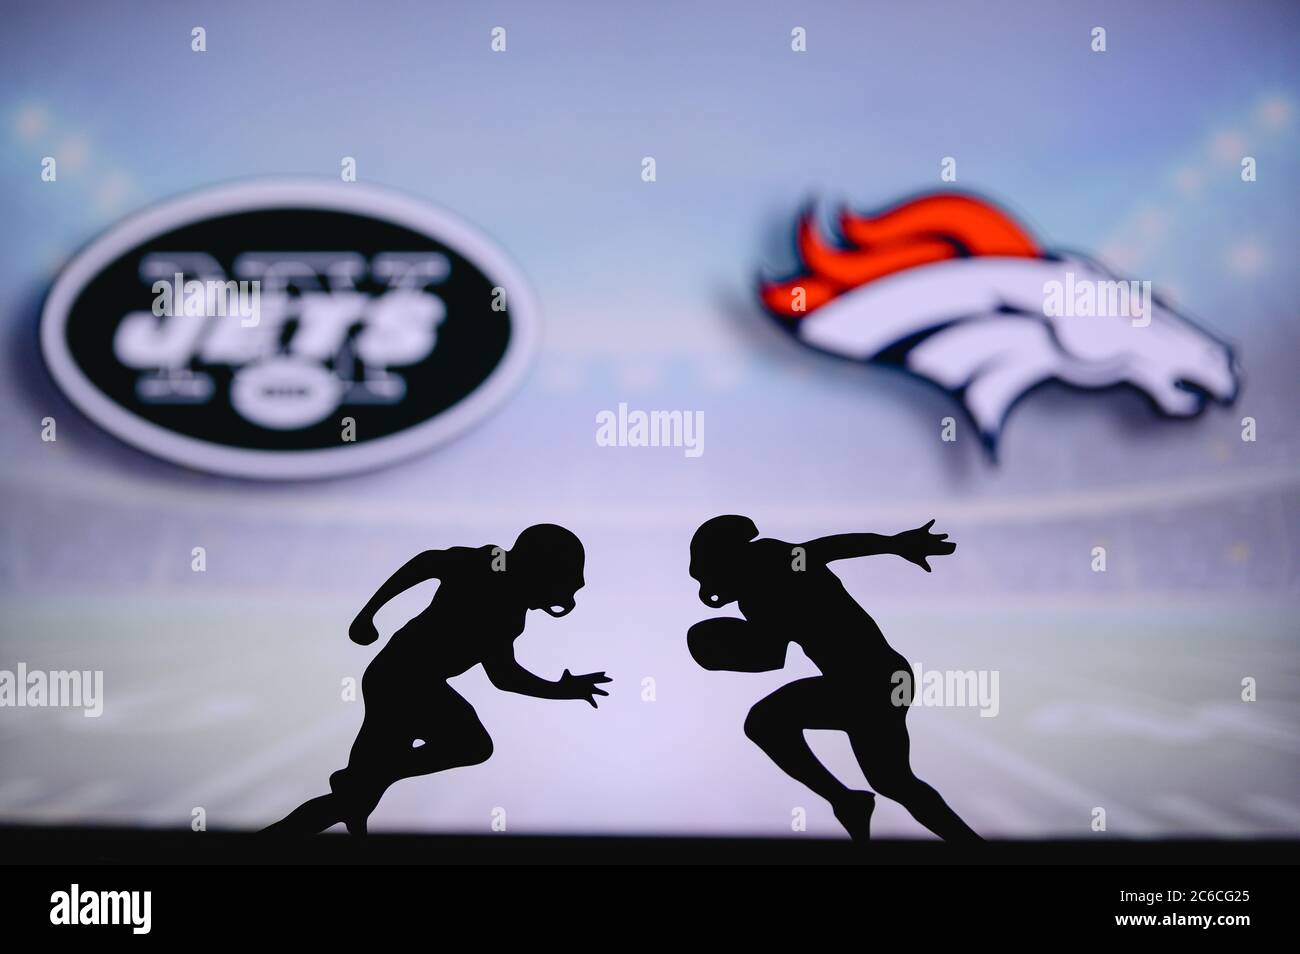 New York Jets vs. Denver Broncos. NFL match poster. Two american football  players silhouette facing each other on the field. Clubs logo in background  Stock Photo - Alamy